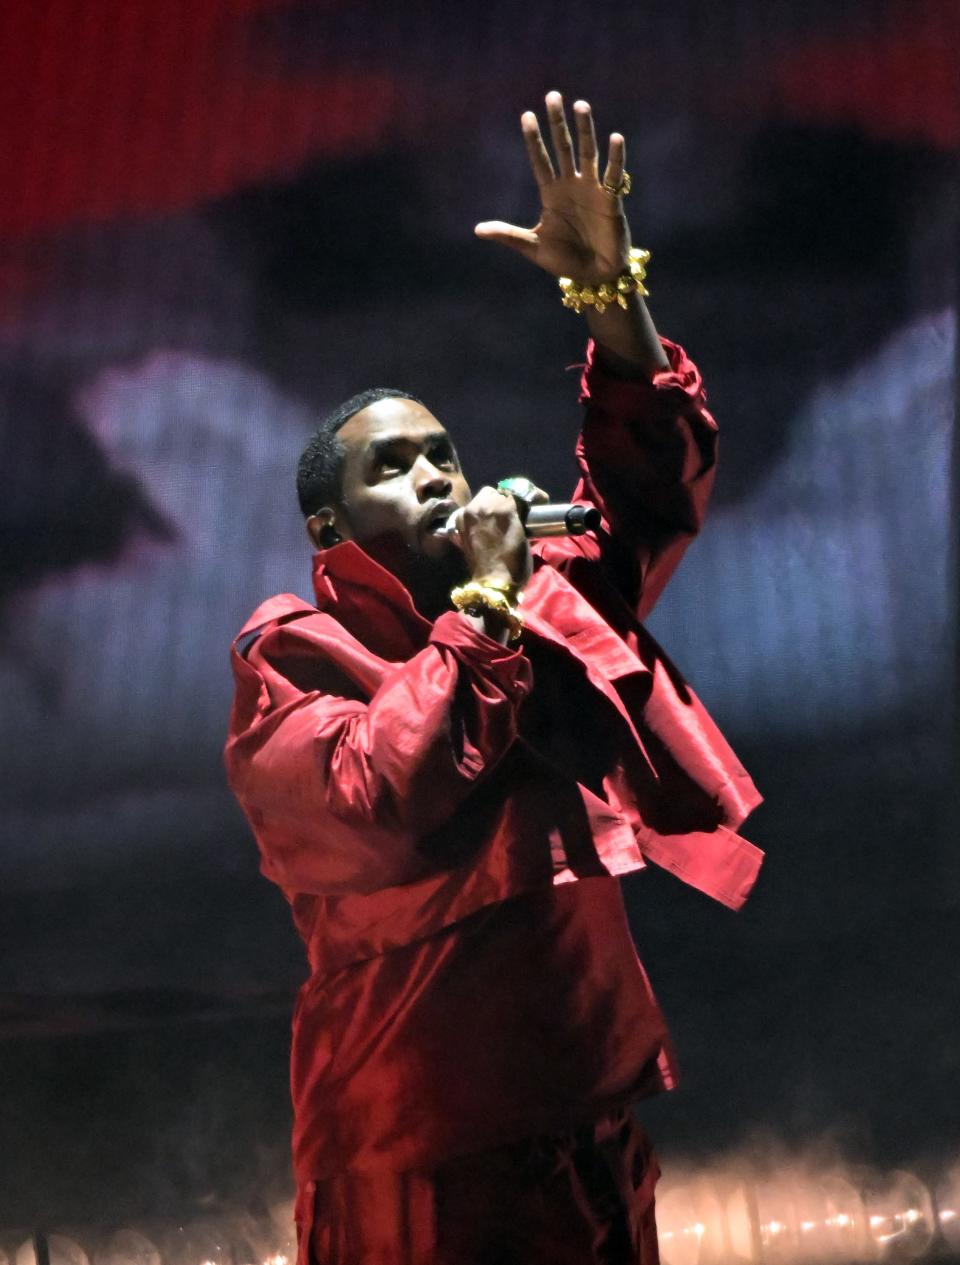 A judge has ruled a woman cannot remain anonymous in gang rape against Diddy.